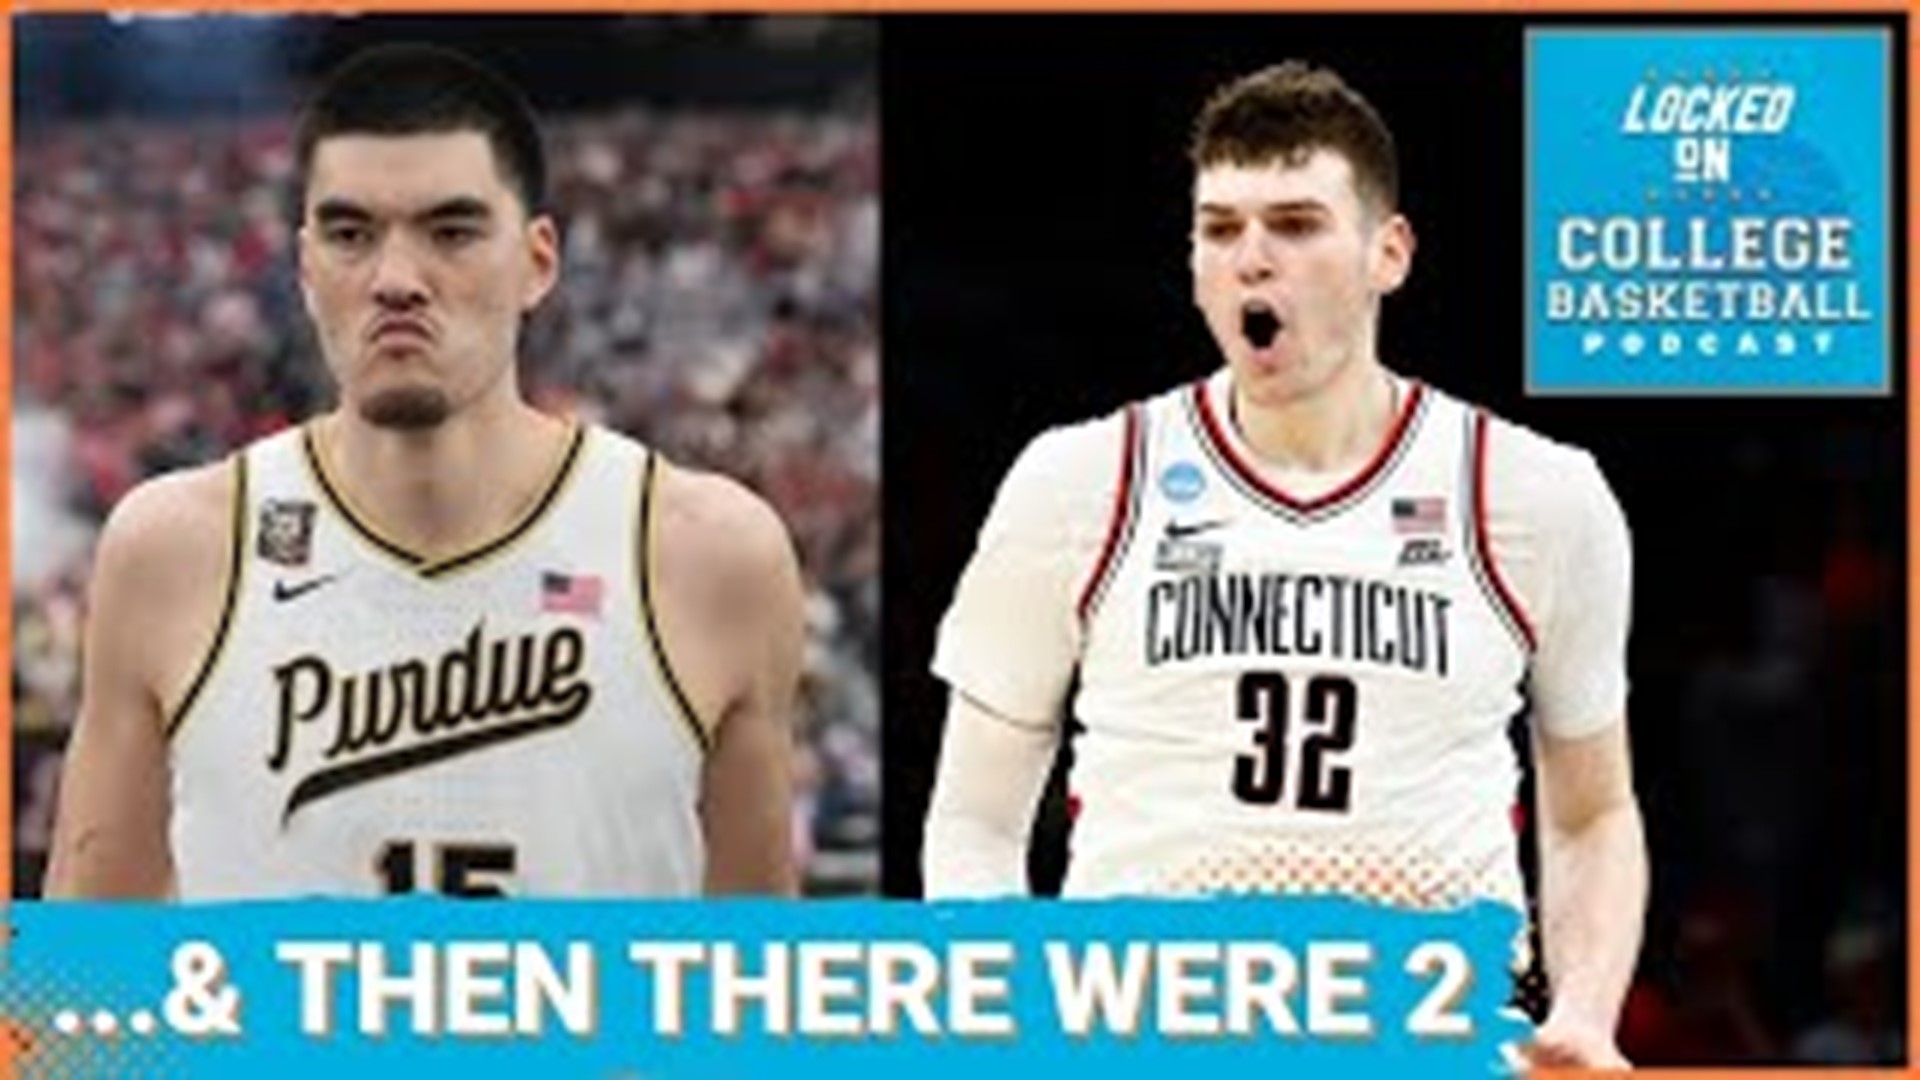 Purdue and NC State open up the Final Four action, followed by UConn against Alabama.

Will Purdue's redemption tour continue, fueled by Zach Edey?